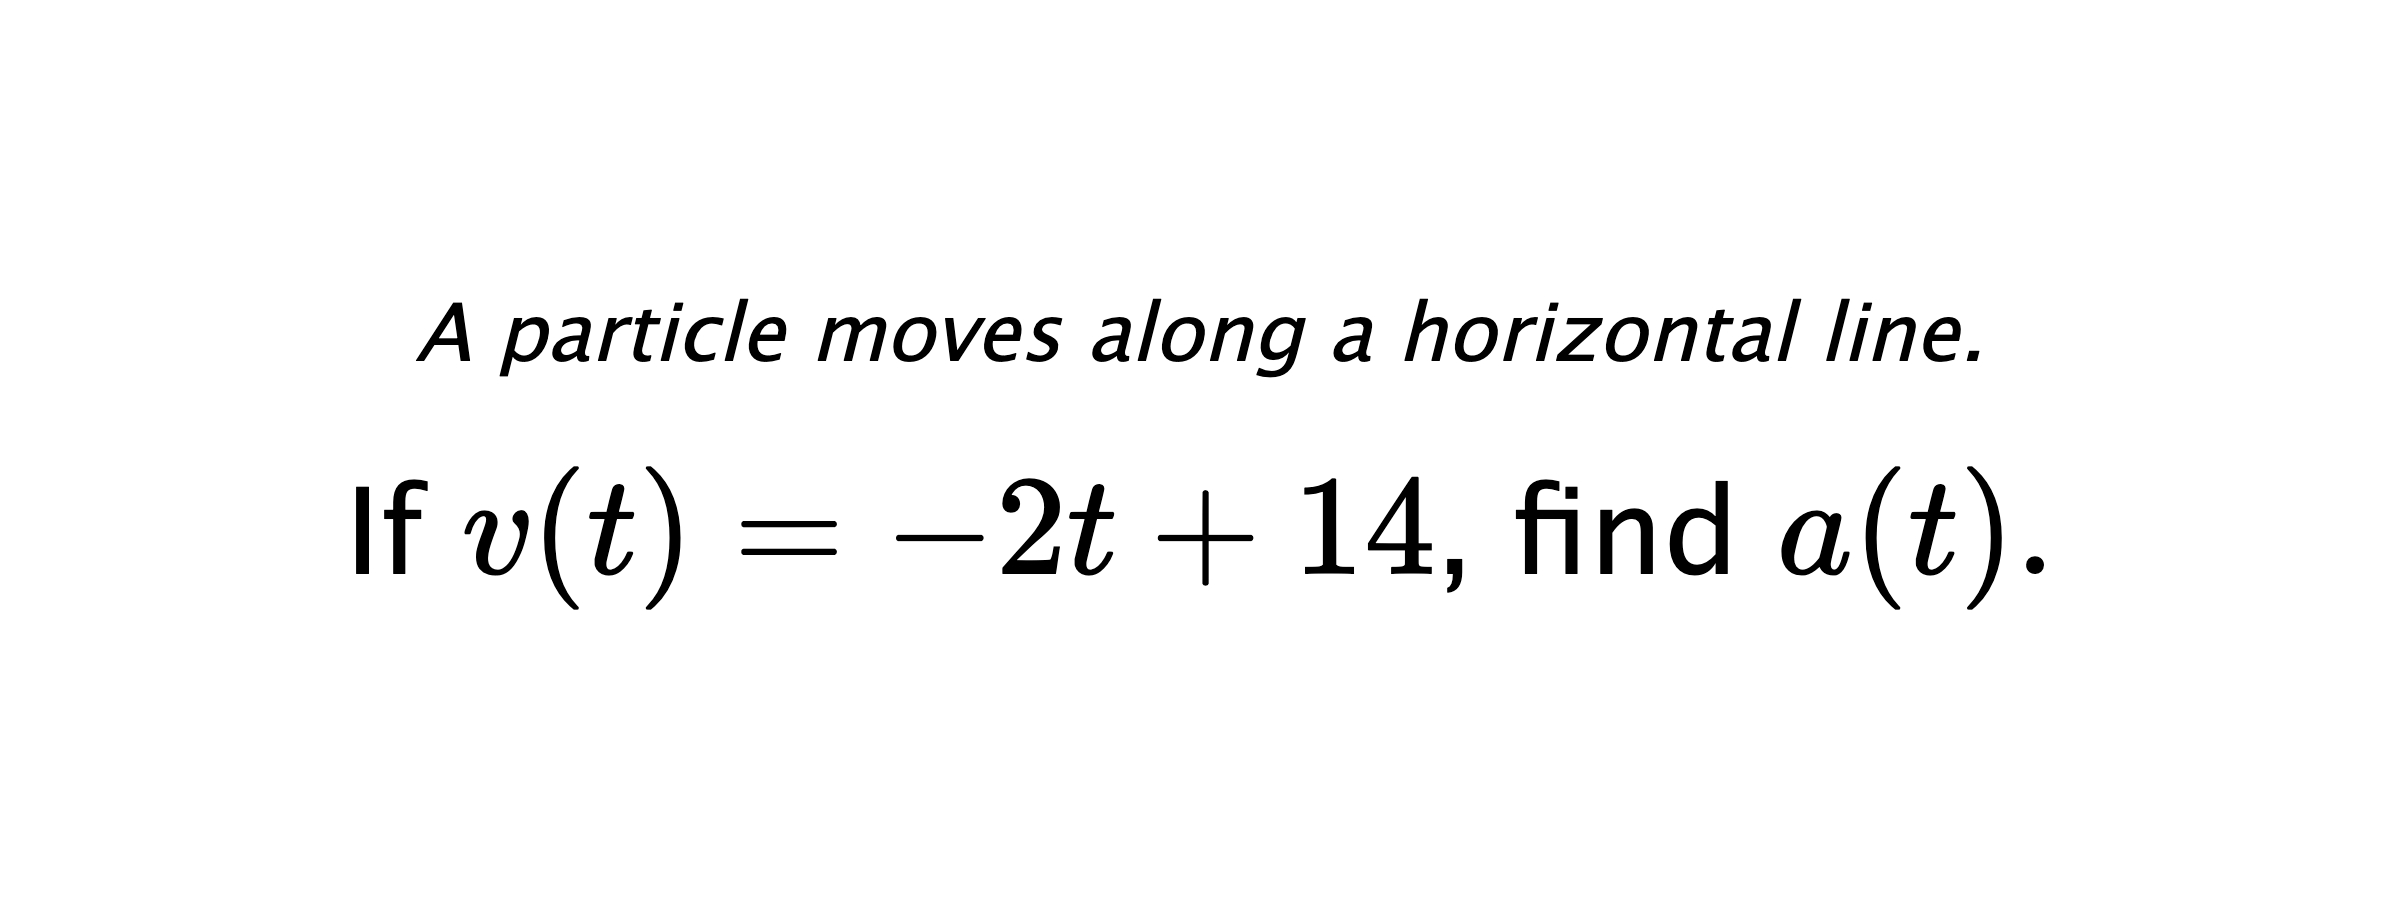 A particle moves along a horizontal line. If $ v(t)=-2t+14 $, find $ a(t). $